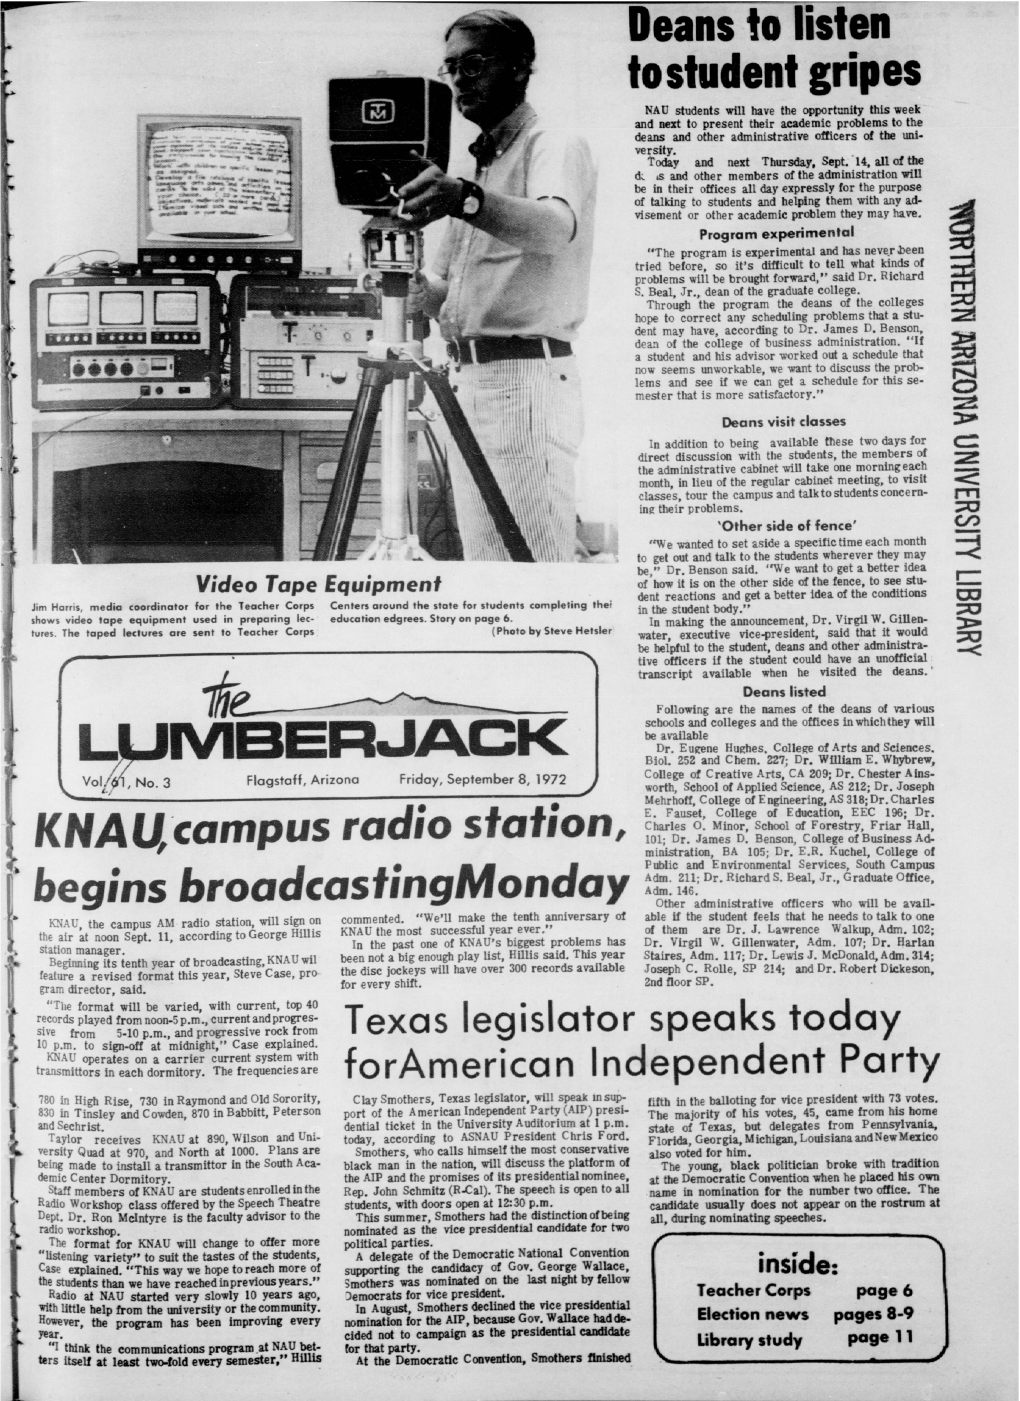 Deans to Listen to Student Gripes KNAU,Campus Radio Station, Begins